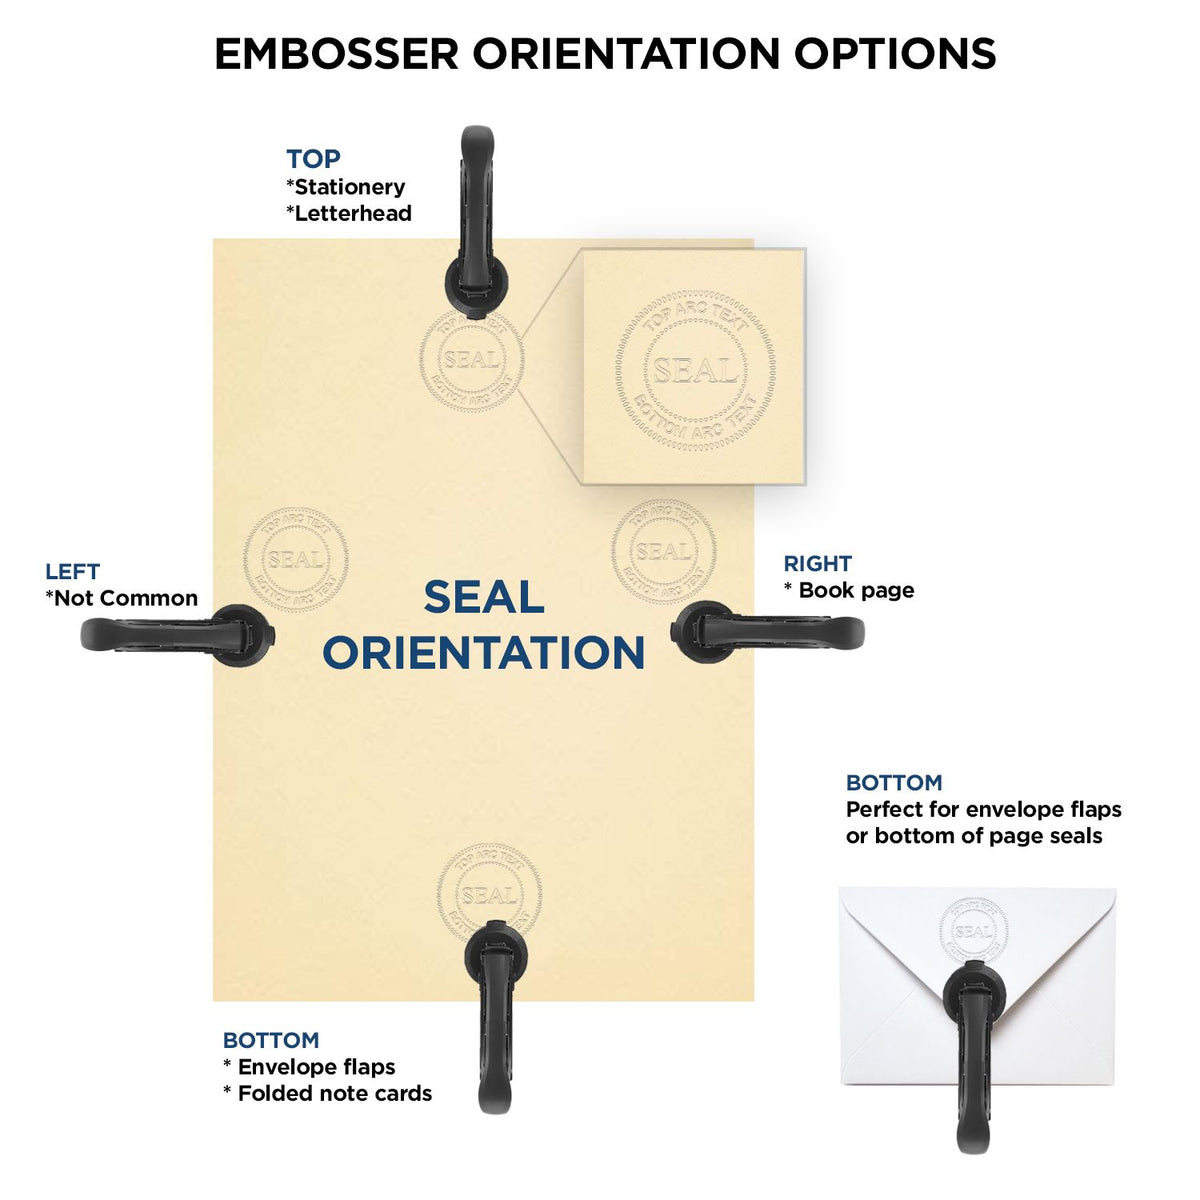 An infographic for the Handheld Illinois Professional Engineer Embosser showing embosser orientation, this is showing examples of a top, bottom, right and left insert.